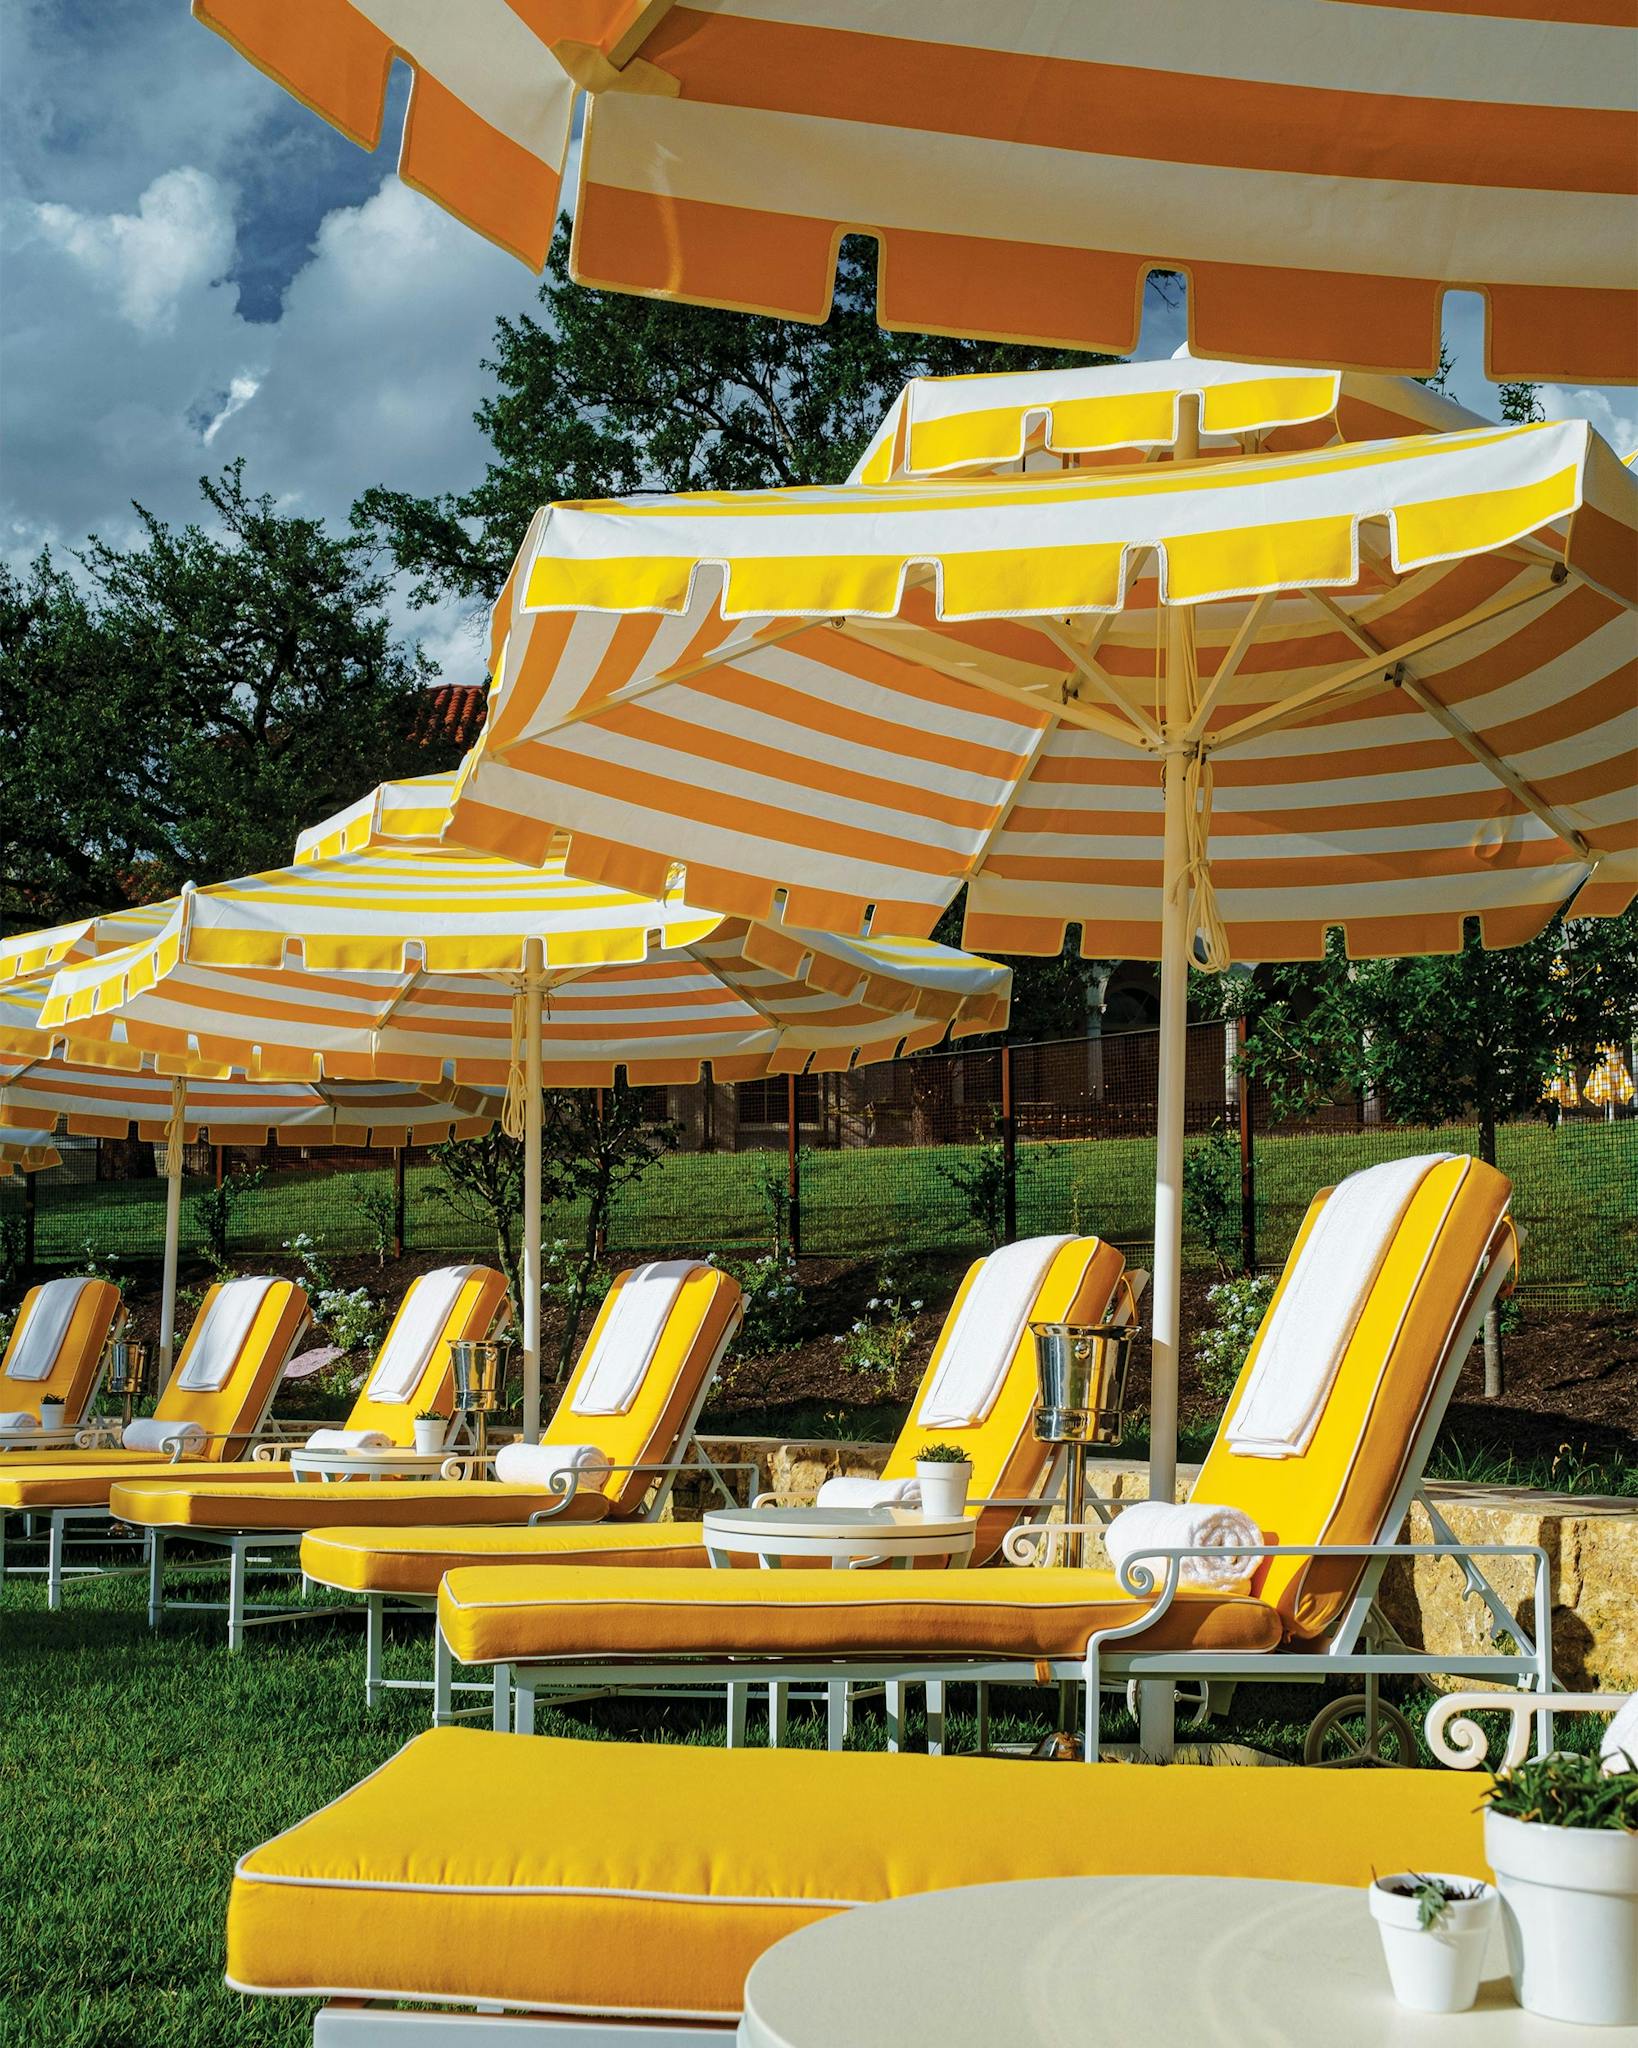 The yellow sun chairs and umbrellas by the pool of the Commodore Perry.